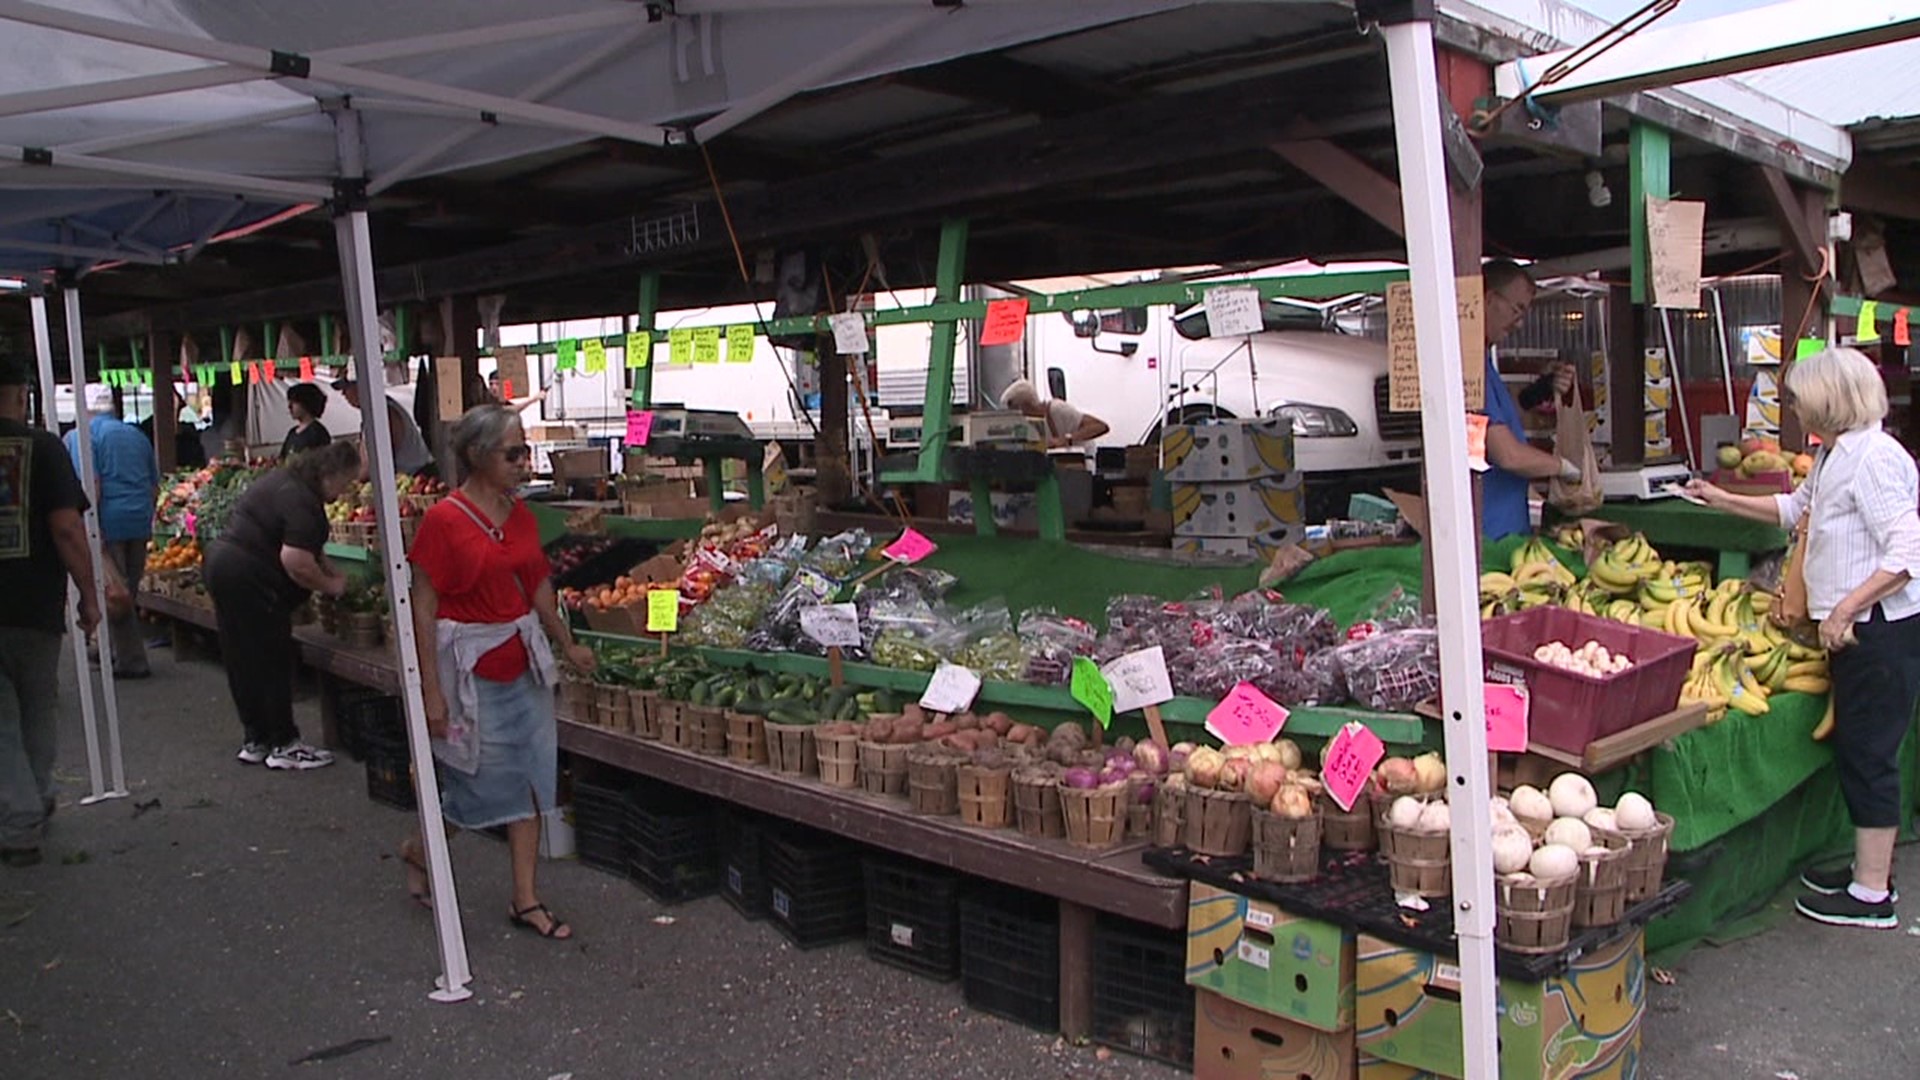 Farmers markets have long been a source for locally produced fruits and vegetables, often available at lower prices, but growing inflation means growing problems.